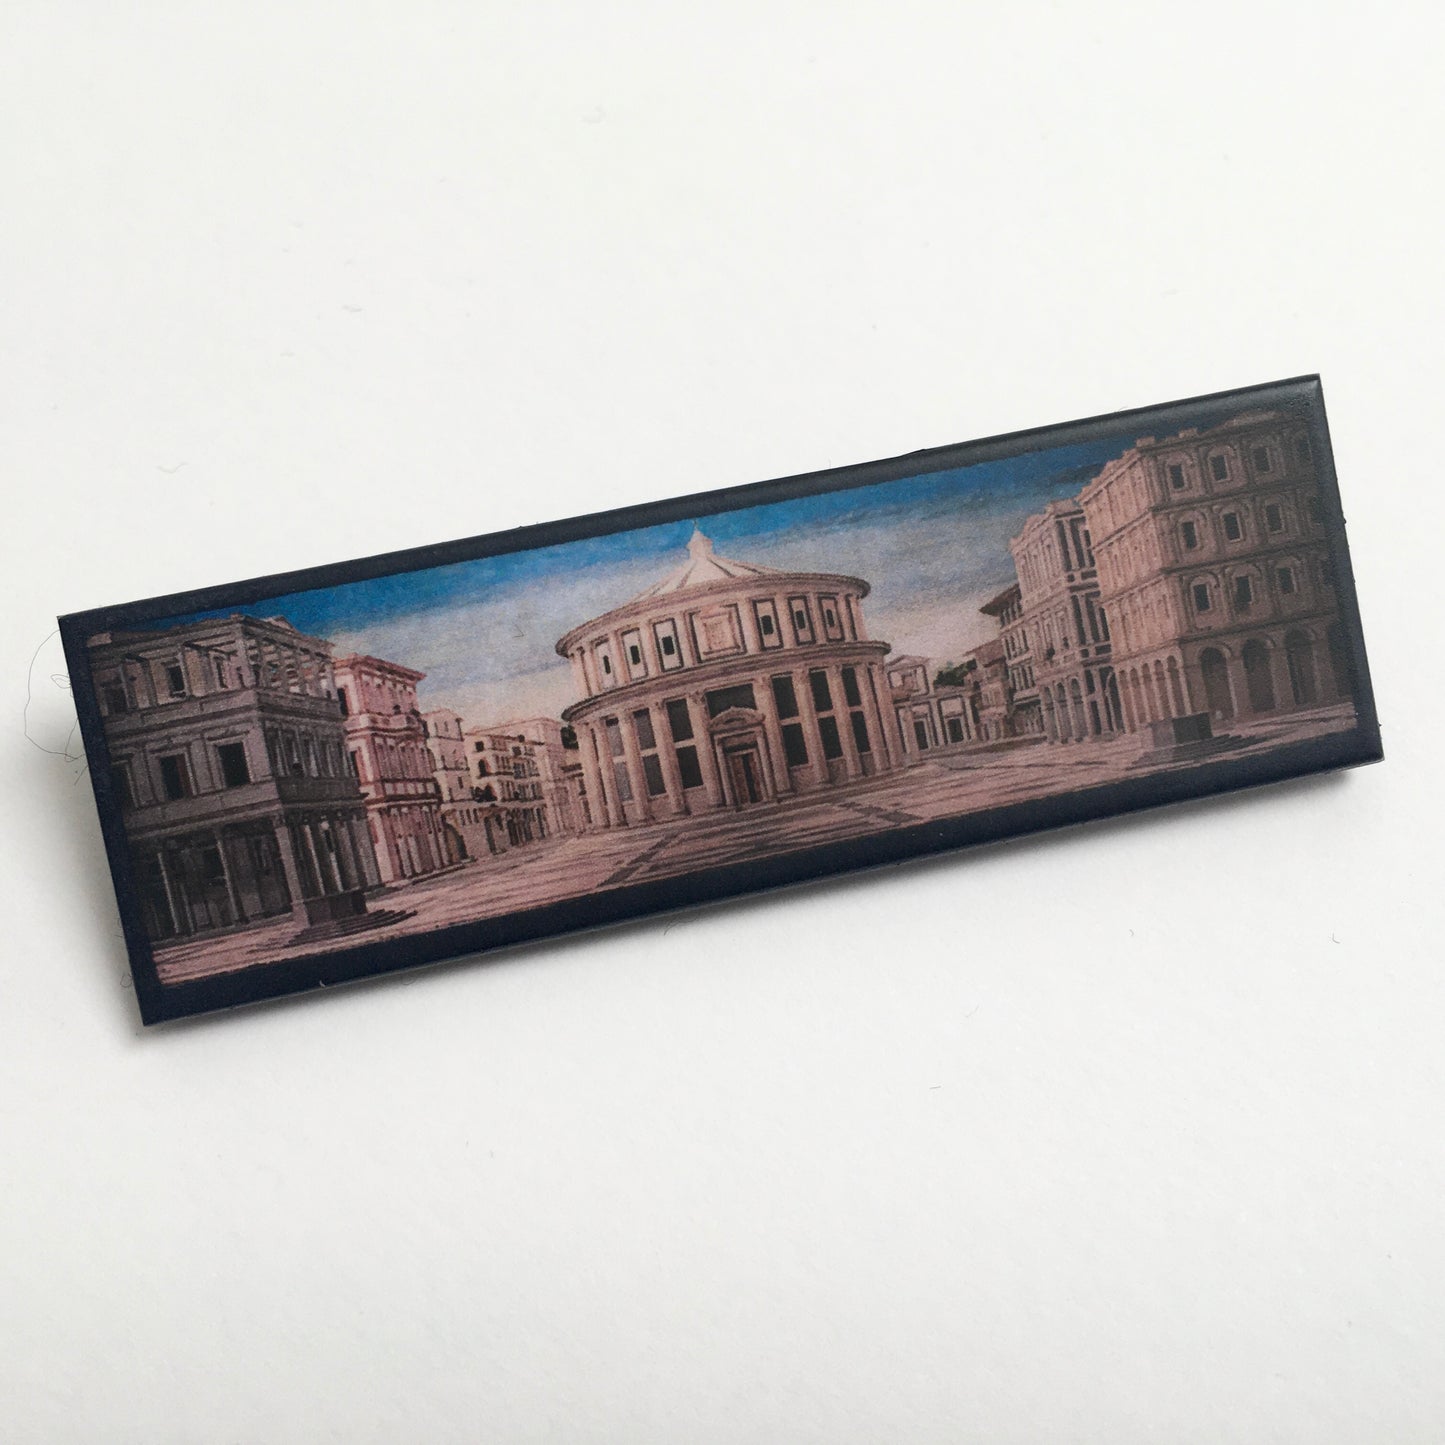 The Ideal City of Urbino art painting inspired Obljewellery to design this statement brooch handmade from sustainable wood. Aesthetic art brooch perfect artsy gift for her and him.